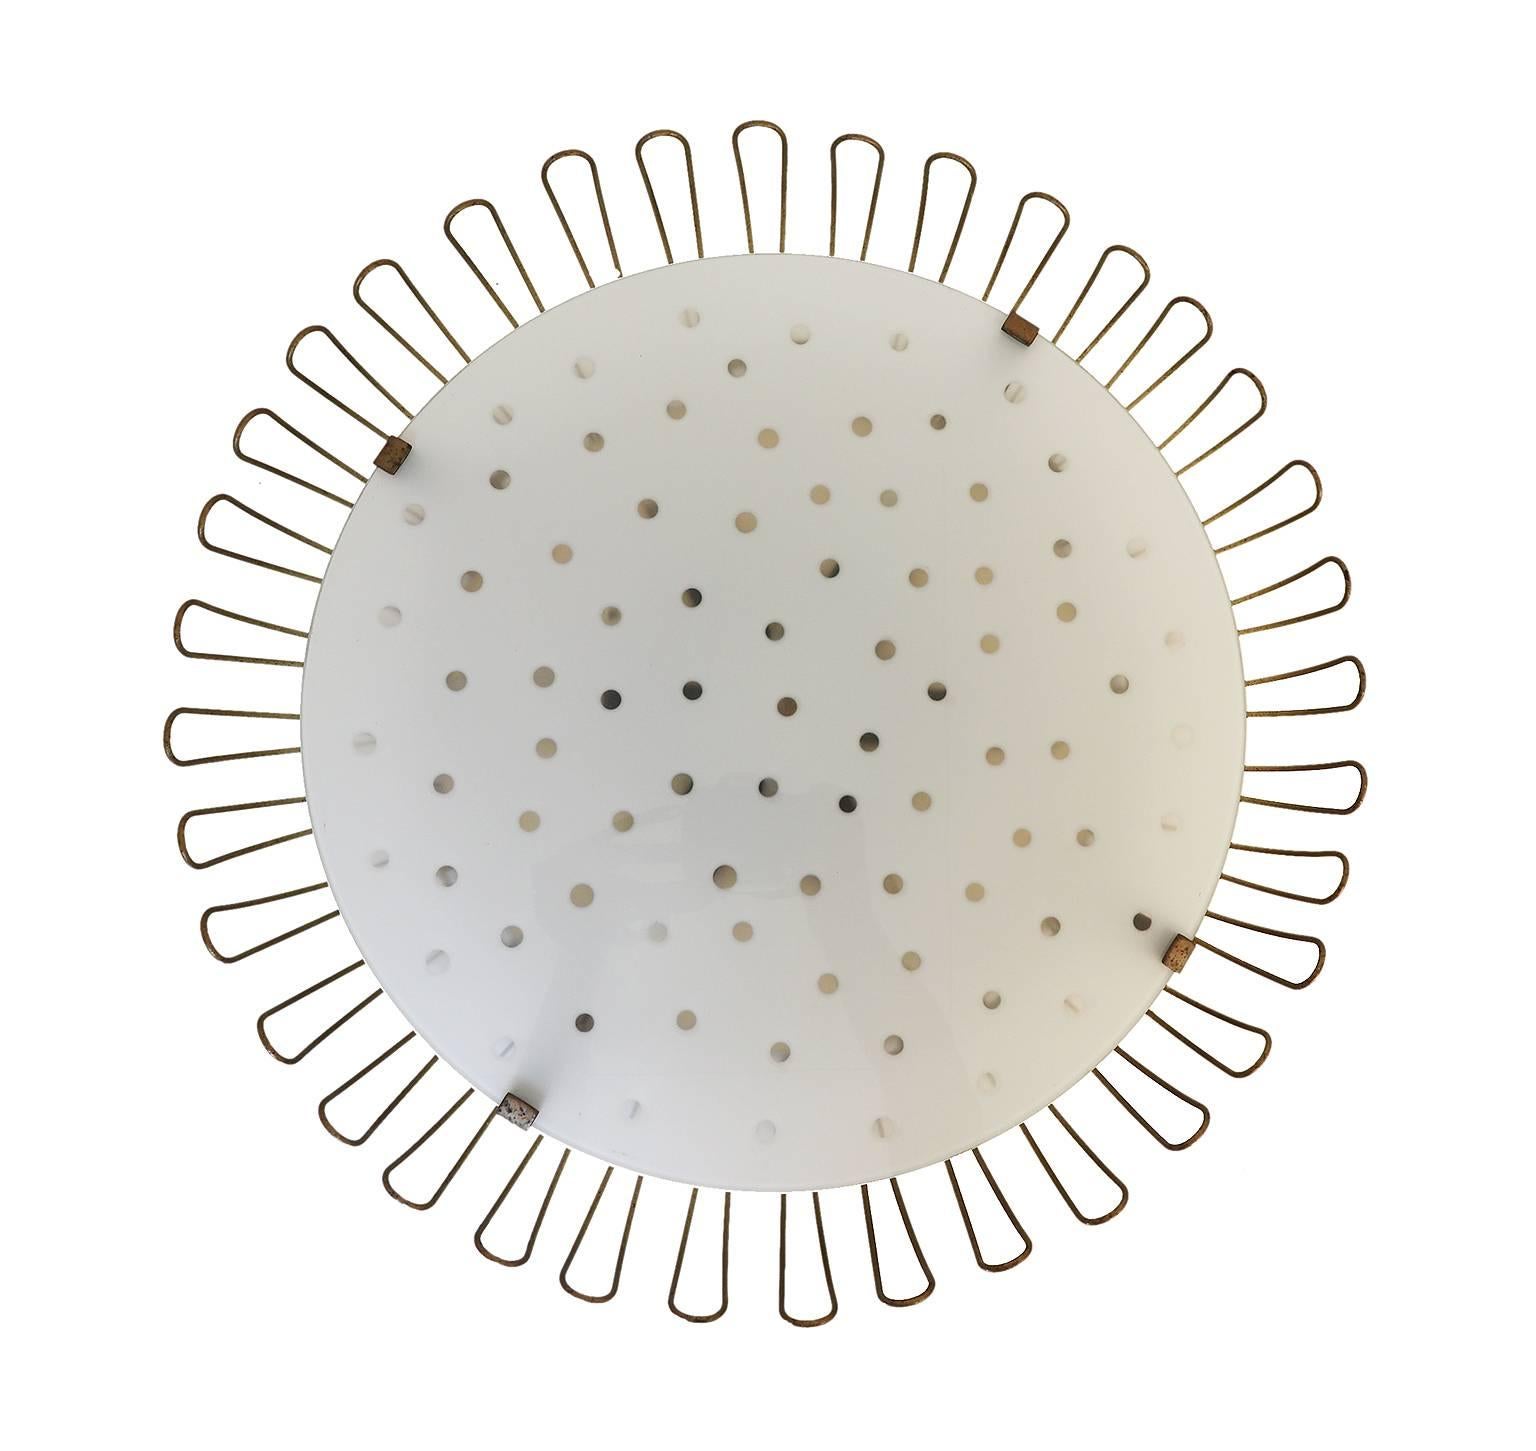 Beautiful and unique mid century modern sunflower ceiling and wall light with a glass cover plate with transparent dots, surrounded by brass wired petals on a perforated metal frame. Designed by Karl Walther. Manufactured by Kurt Kaiser, Germany in